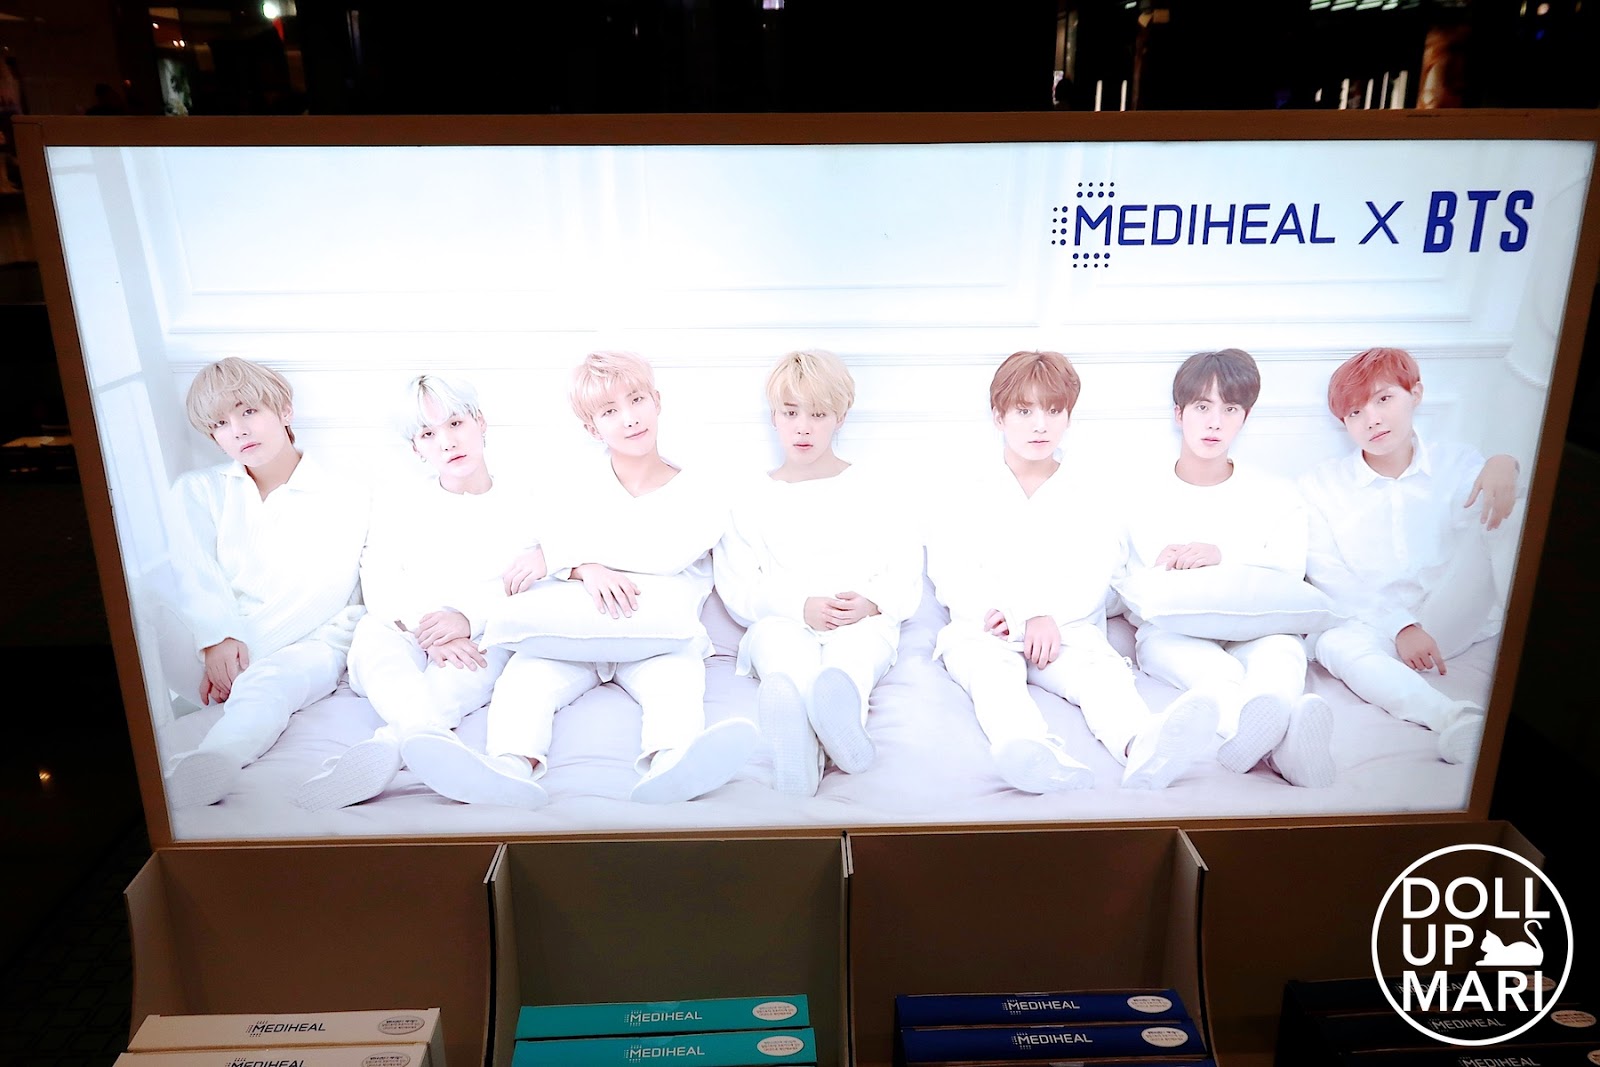 Mediheal X BTS In White Outfits In Light Up Panaflex Signage